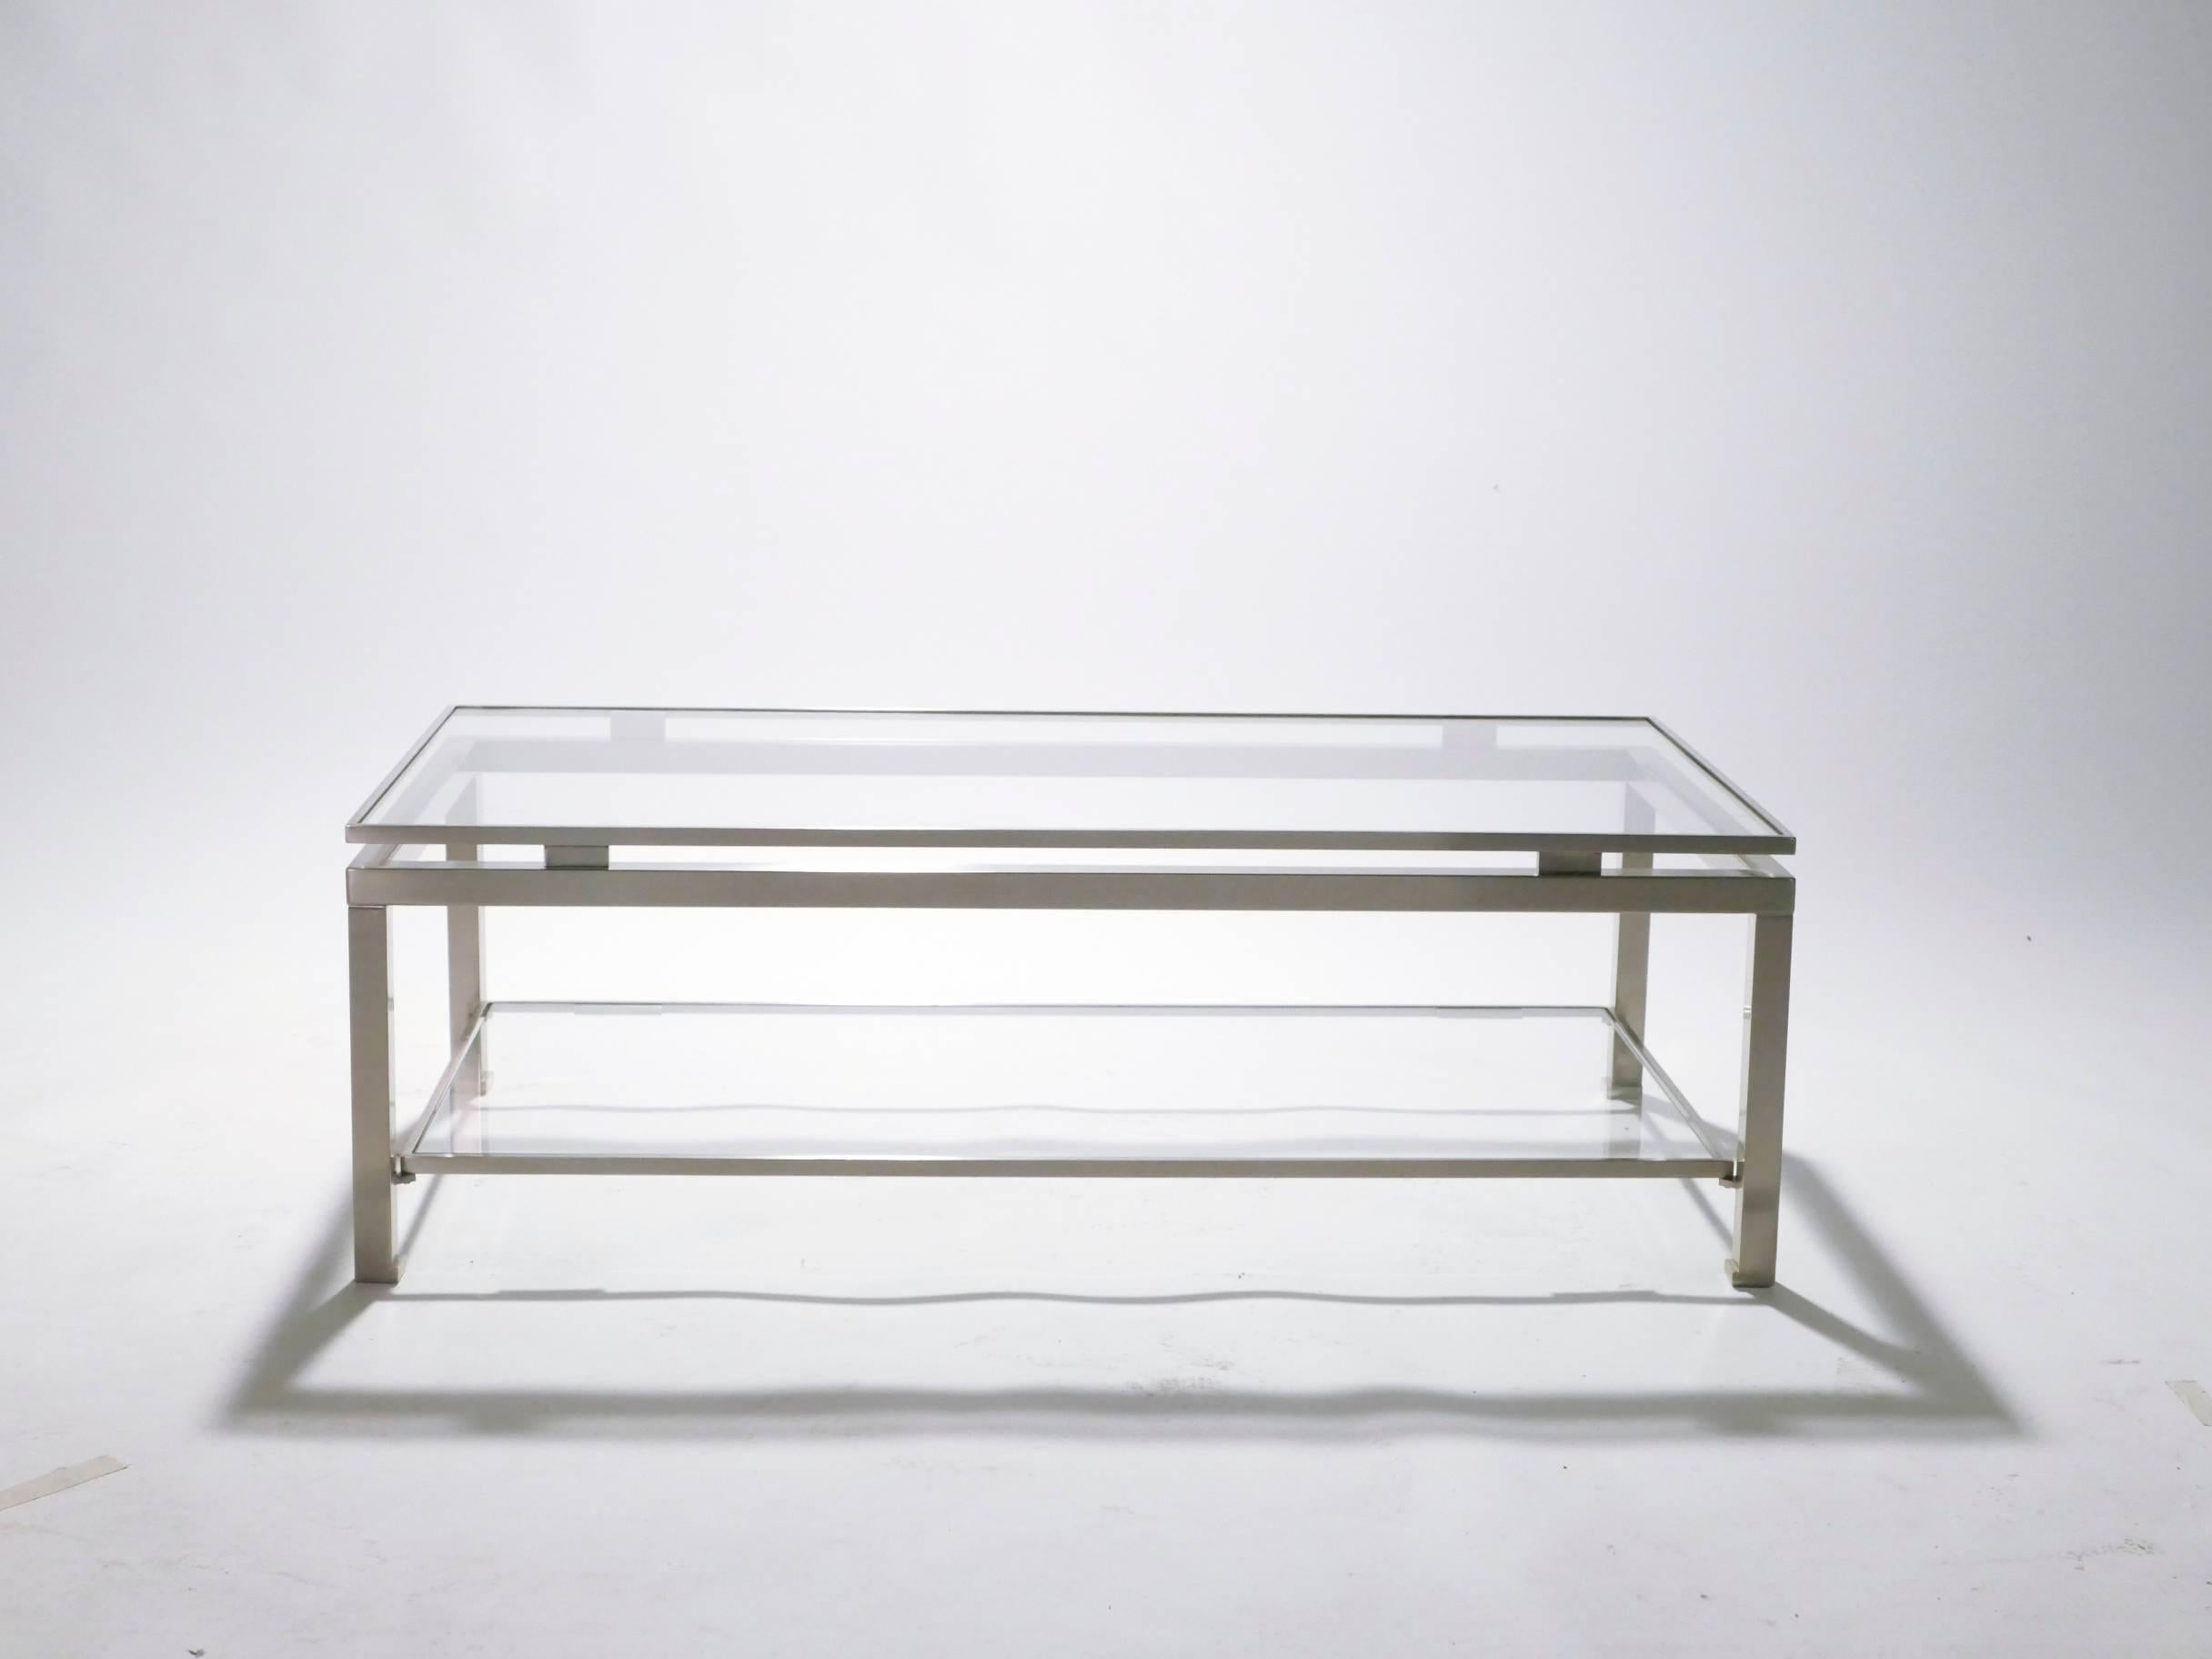 Subtly chic, this coffee table by Guy Lefevre for renowned Paris-based design firm Maison Jansen is slim and modern. Polished nickel makes up the feet of the table, lending a sophisticated and mid-century modern look to the piece, while 2/3